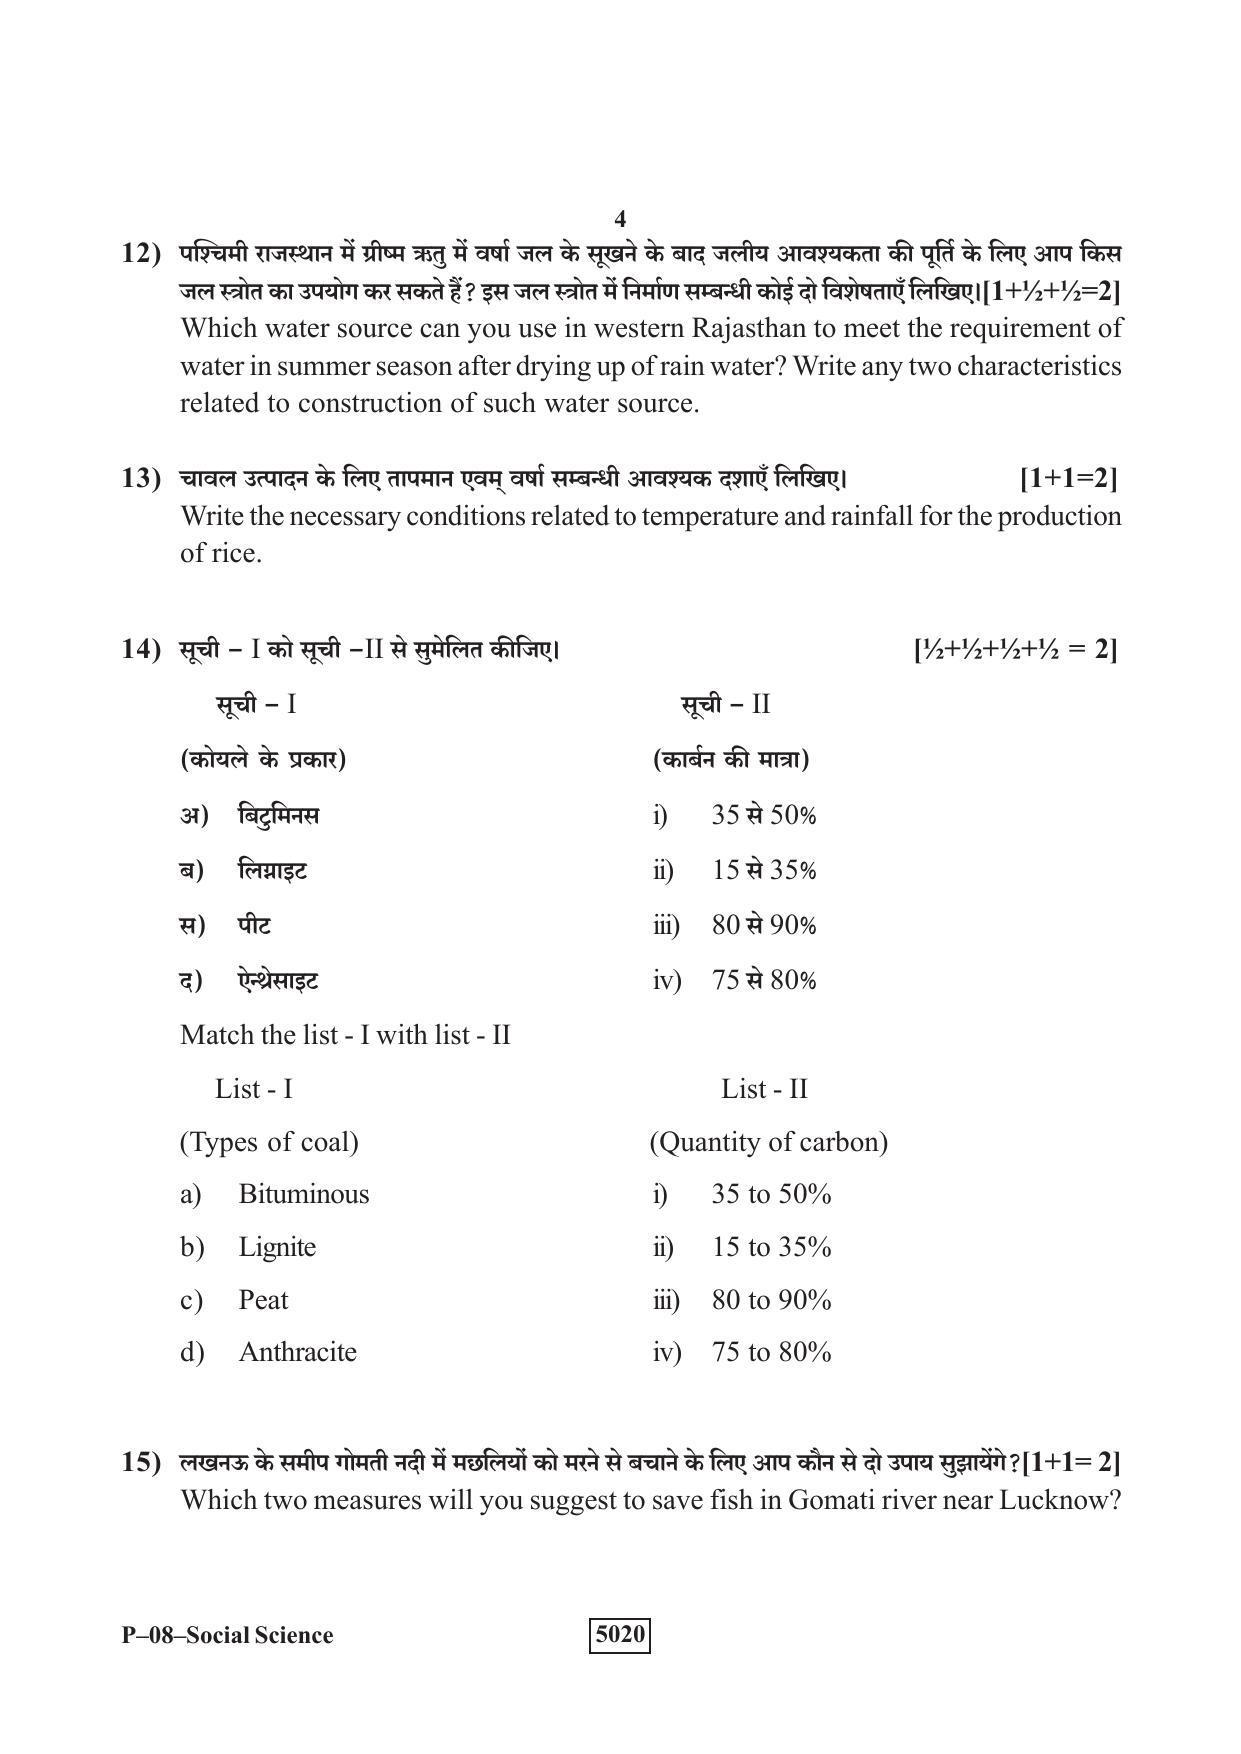 RBSE 2019 Social Science Praveshika Question Paper - Page 4